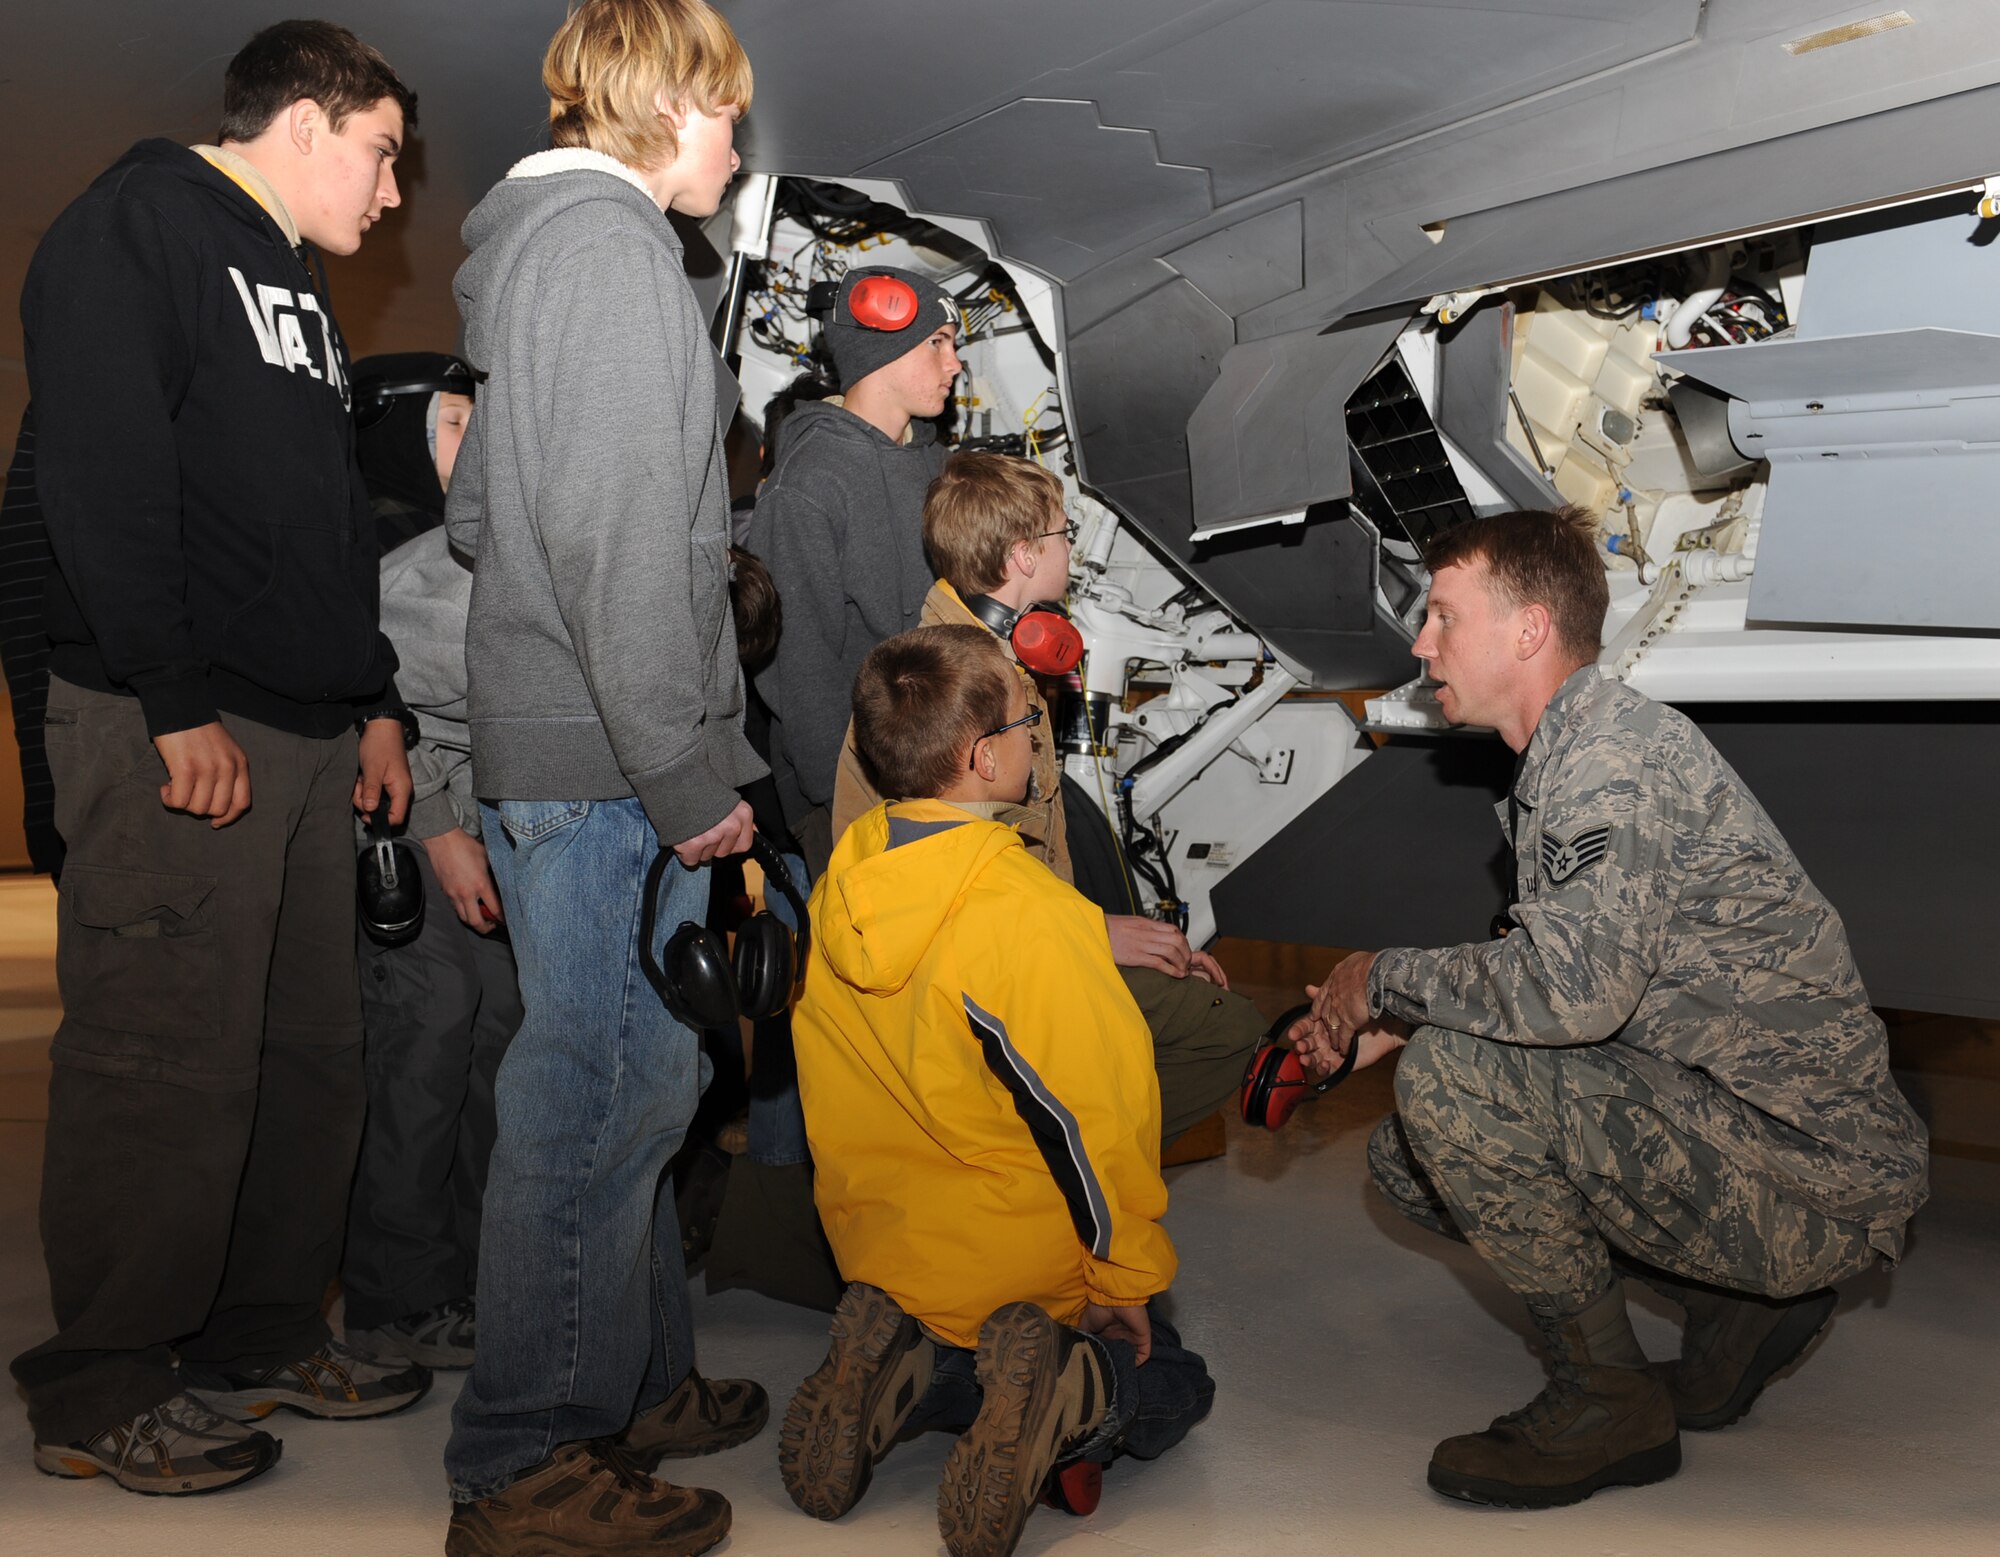 Staff Sgt. Matthew St John, 49th Maintenance Operations Squadron, briefs Boy Scout Troop 174, based out of Albuquerque, N.M., on the F-22A Raptor's capabilities during an F-22A Familiarization Course March 27 at Holloman Air Force Base, N.M. The troop was on their spring break trip.